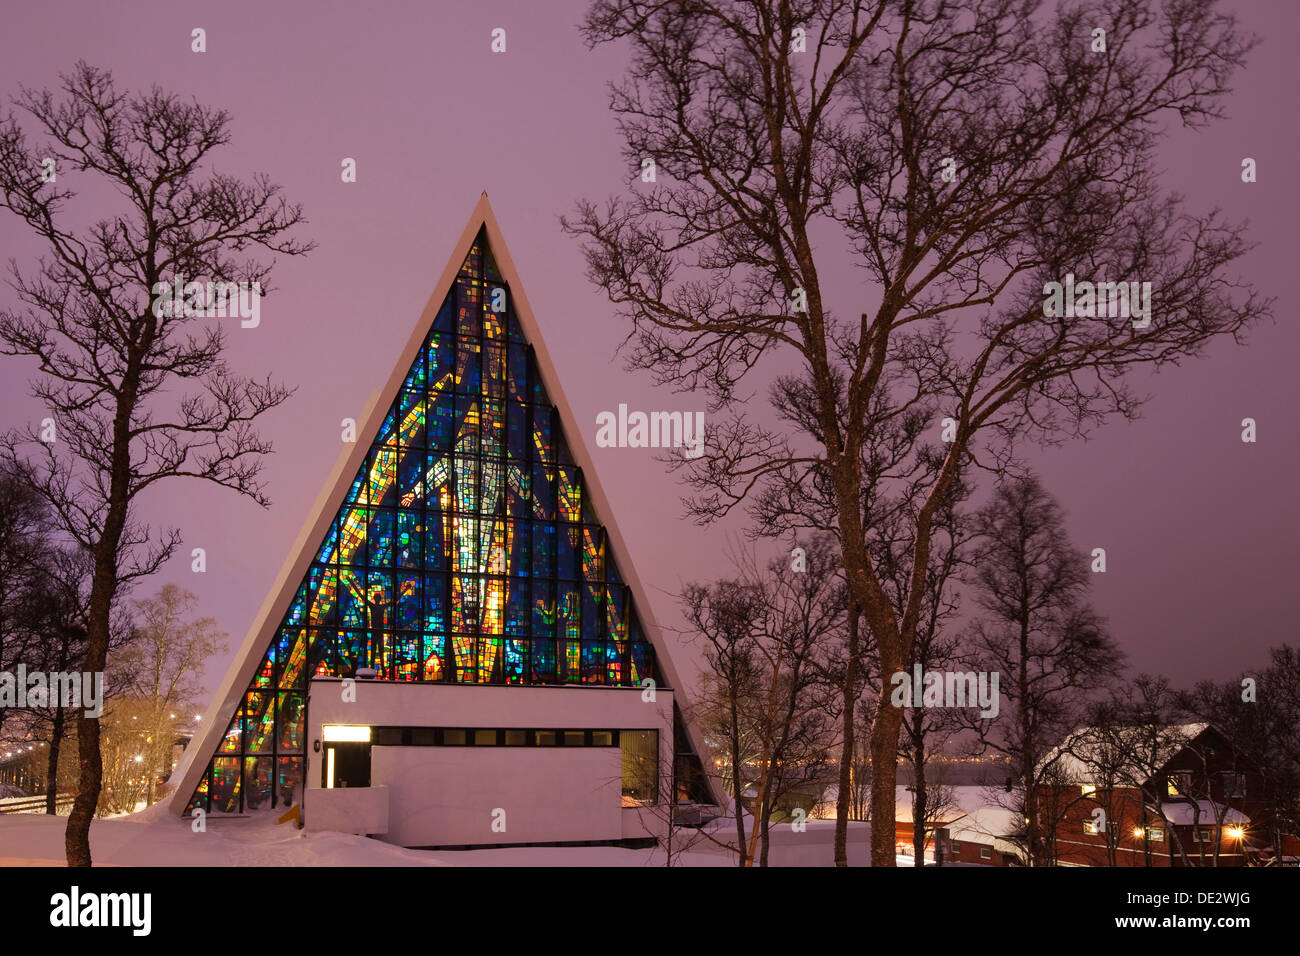 Arctic Cathedral or Tromsdalen Kirke church, in winter, Tromso, Norway, Europe Stock Photo